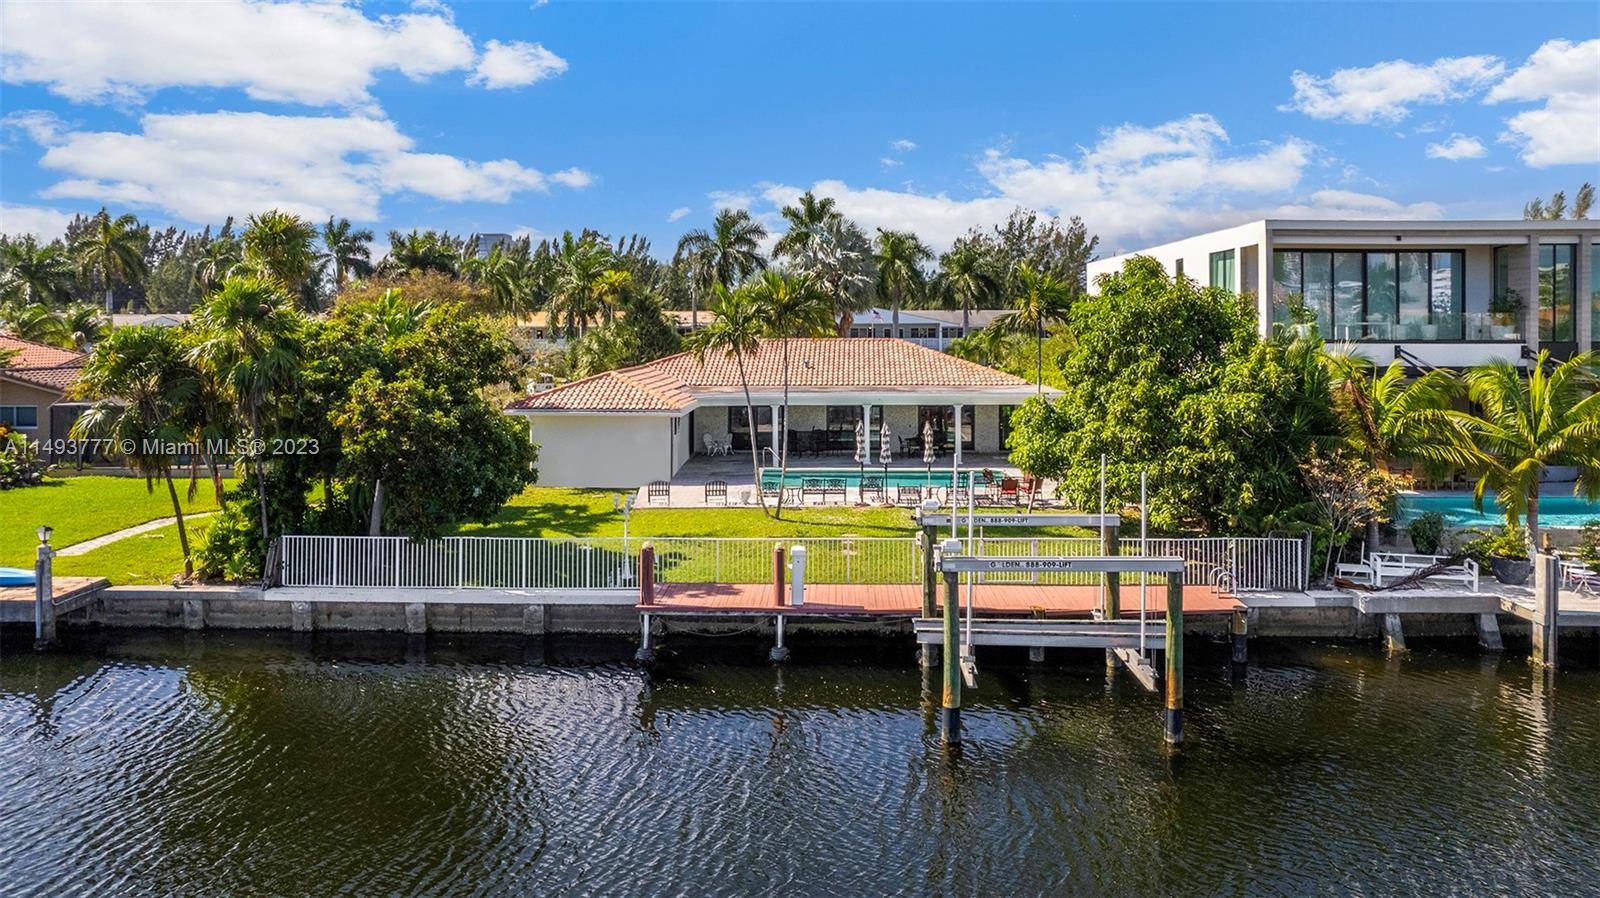 Nestled within the gated waterfront Golden Isles community, this single story waterfront abode boasts 3 bedrooms, 2.